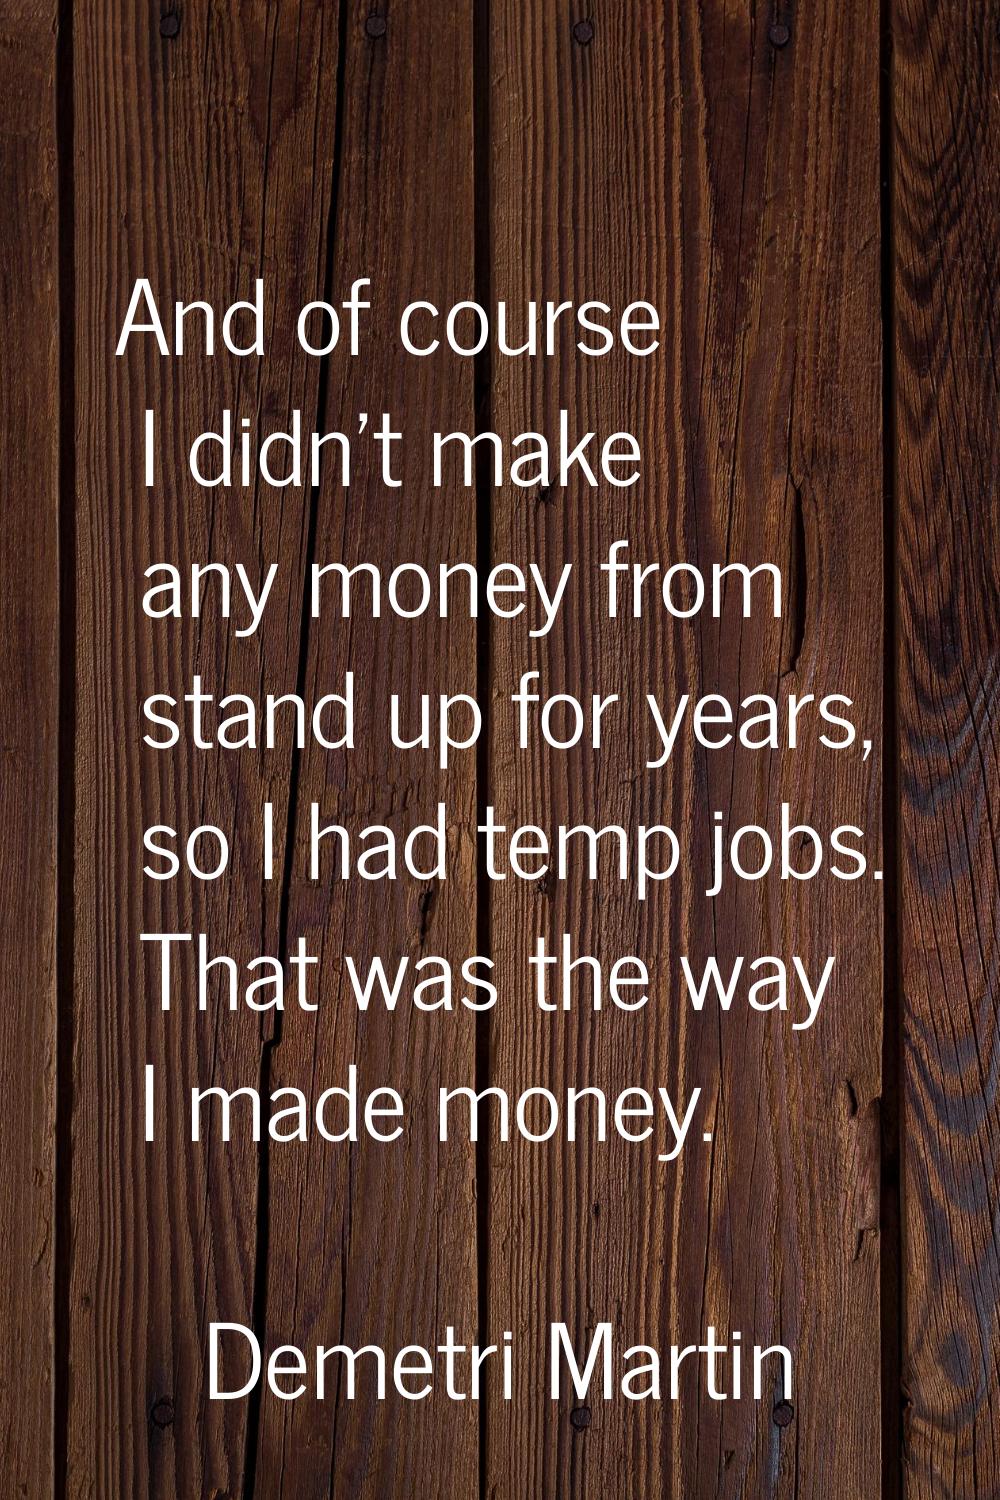 And of course I didn't make any money from stand up for years, so I had temp jobs. That was the way